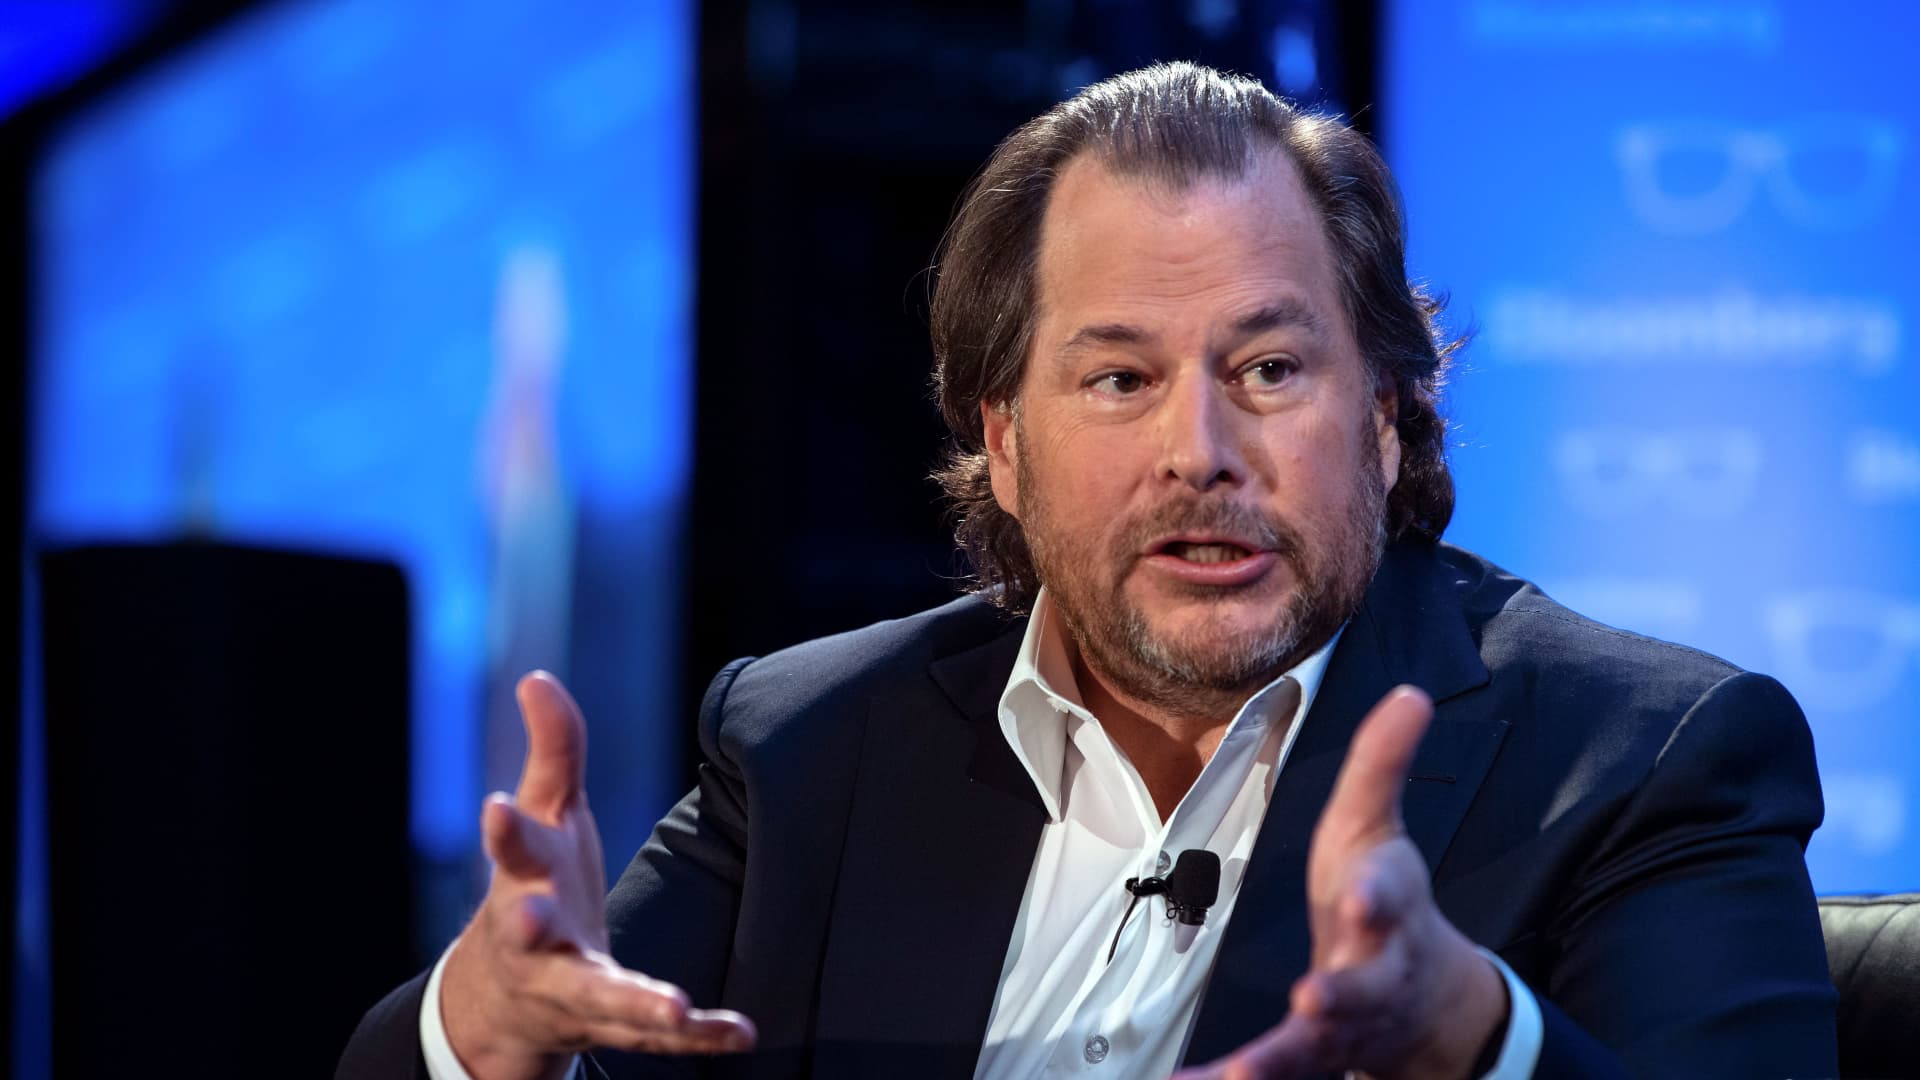 Salesforce cuts about 1,000 jobs even as stock has record one-day surge